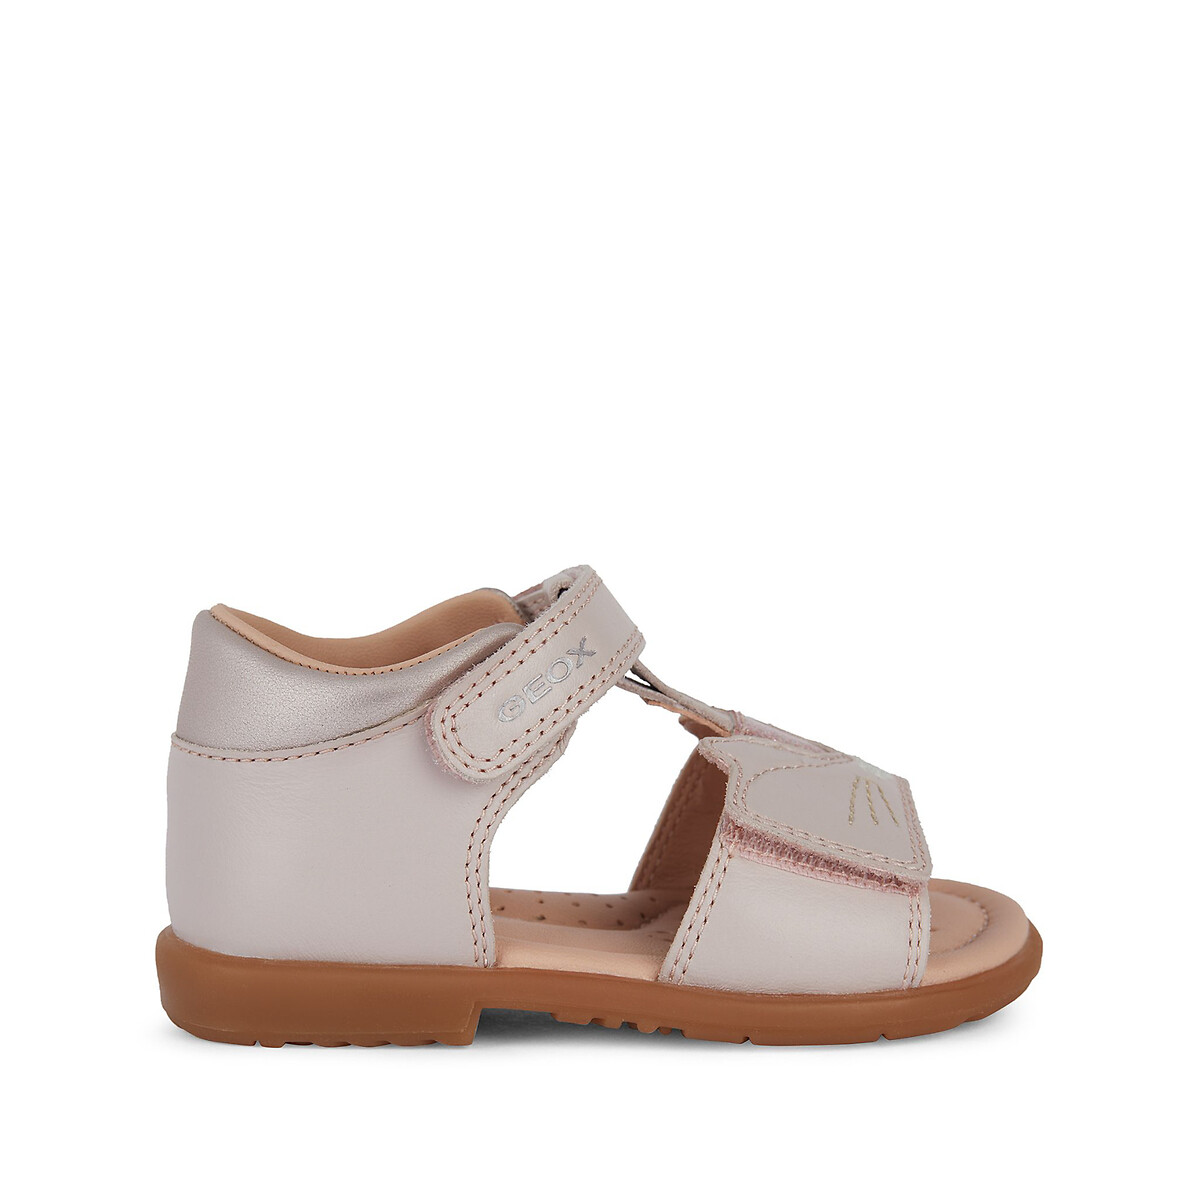 Image of Kids Verred Closed Sandals in Leather with Heel and Touch 'n' Close Fastening